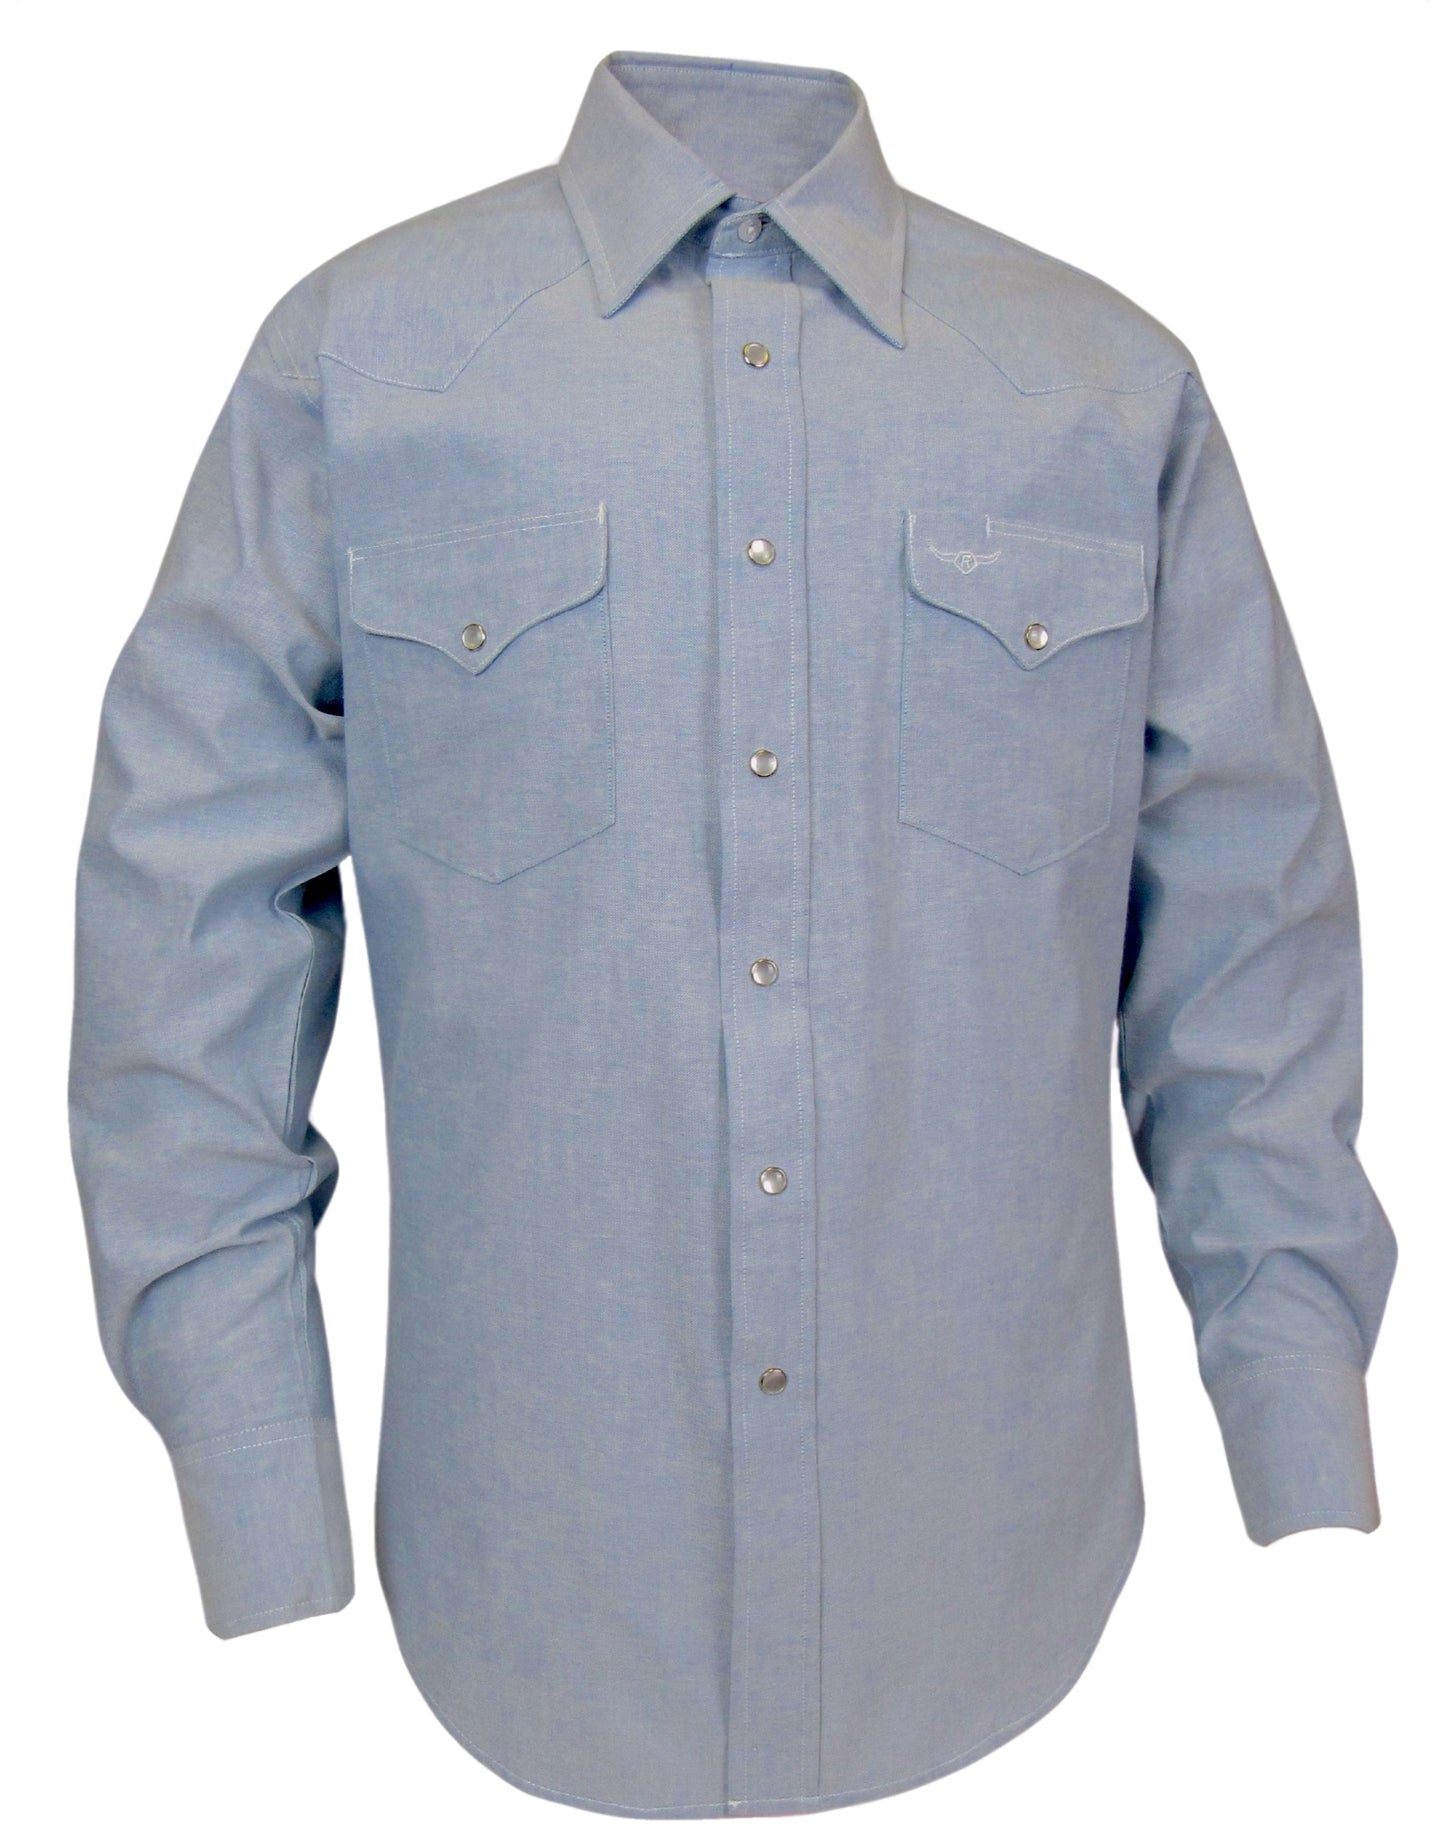 Flying R Ranchwear Made in USA Lt Blue Chambray with snaps